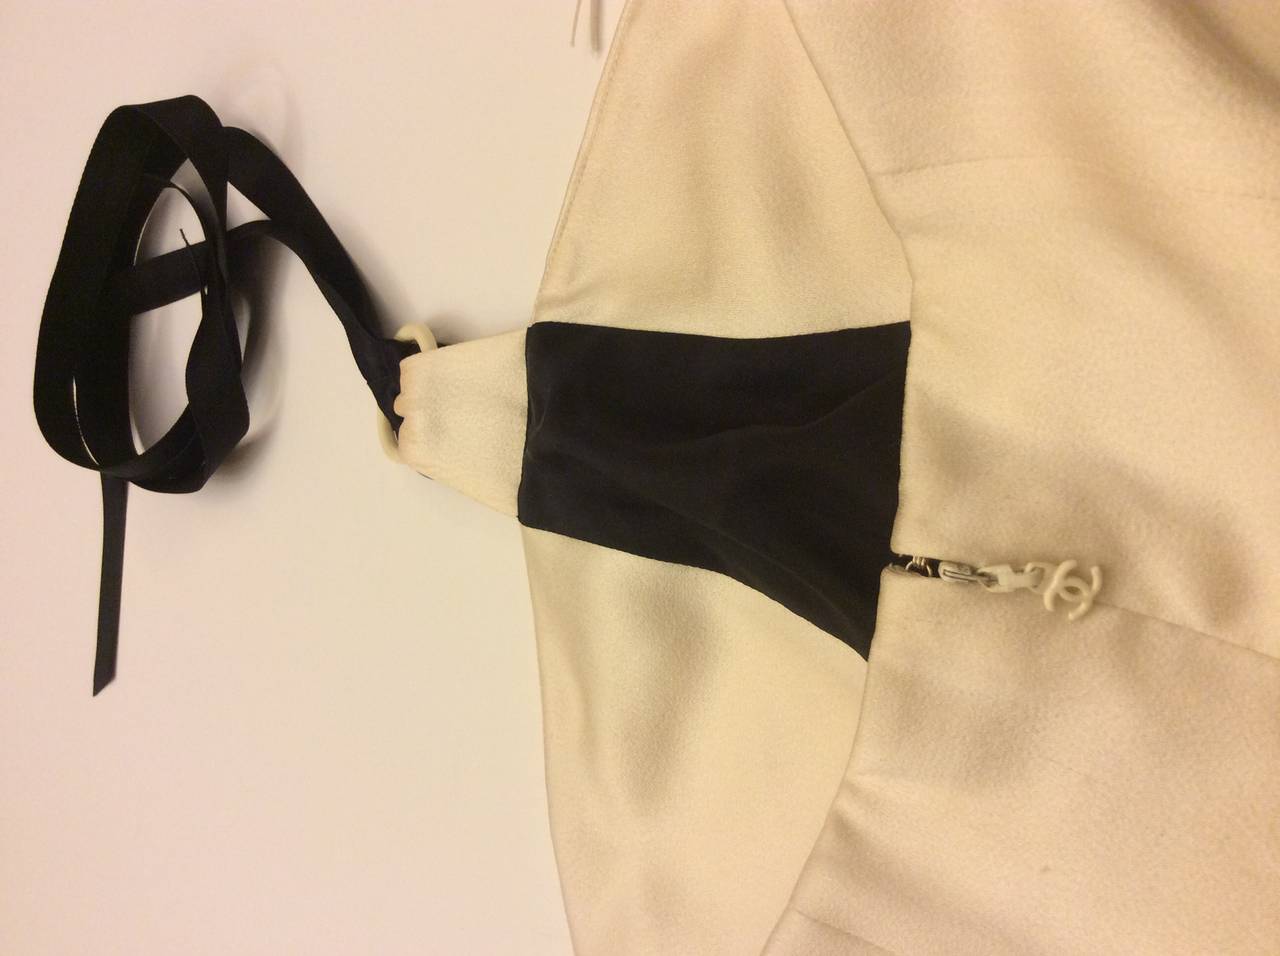 Chanel Silk Halter Black & Ivory Dress 34 In Excellent Condition For Sale In Lake Park, FL